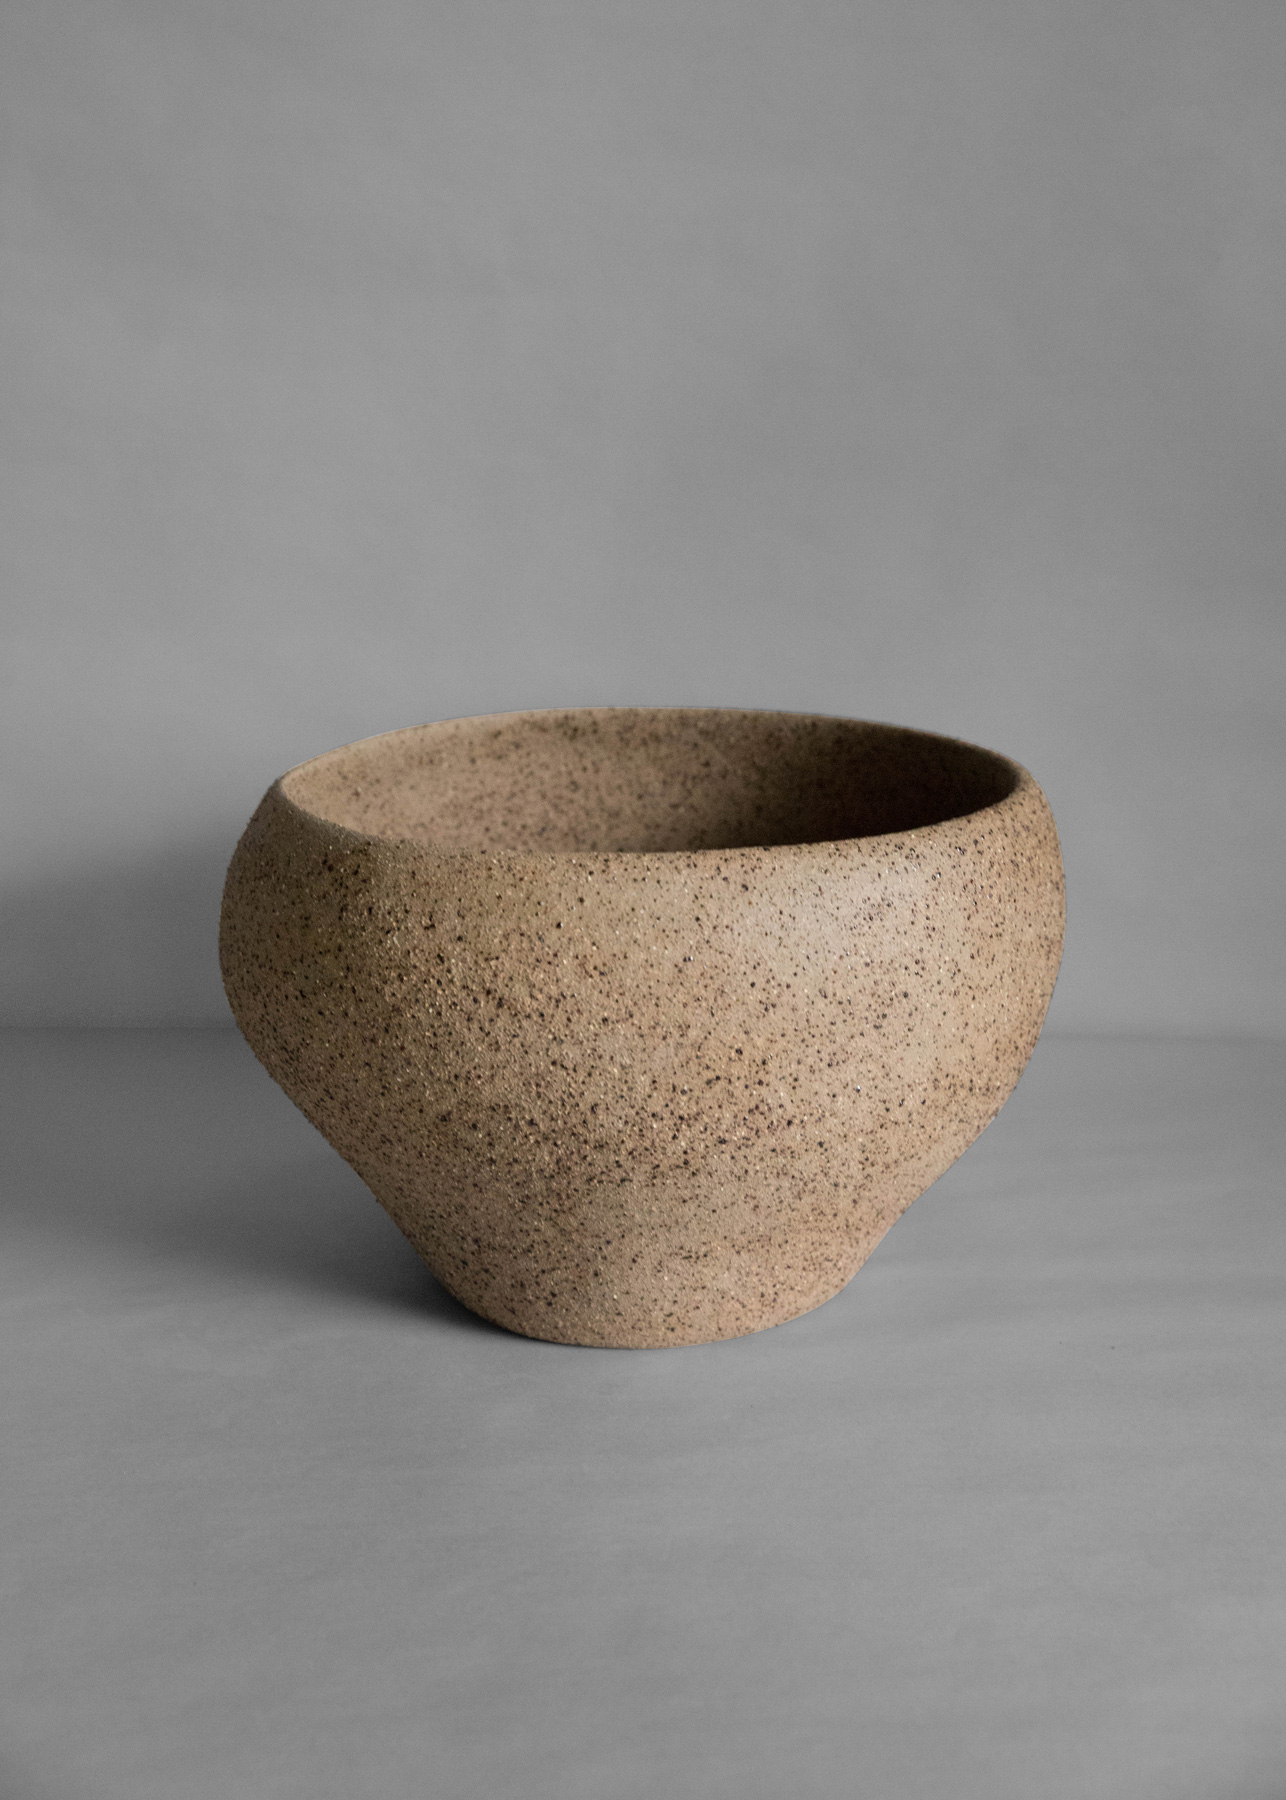 'Ceremonial Bowl' made by Liane Rossler from clay and beeswax.